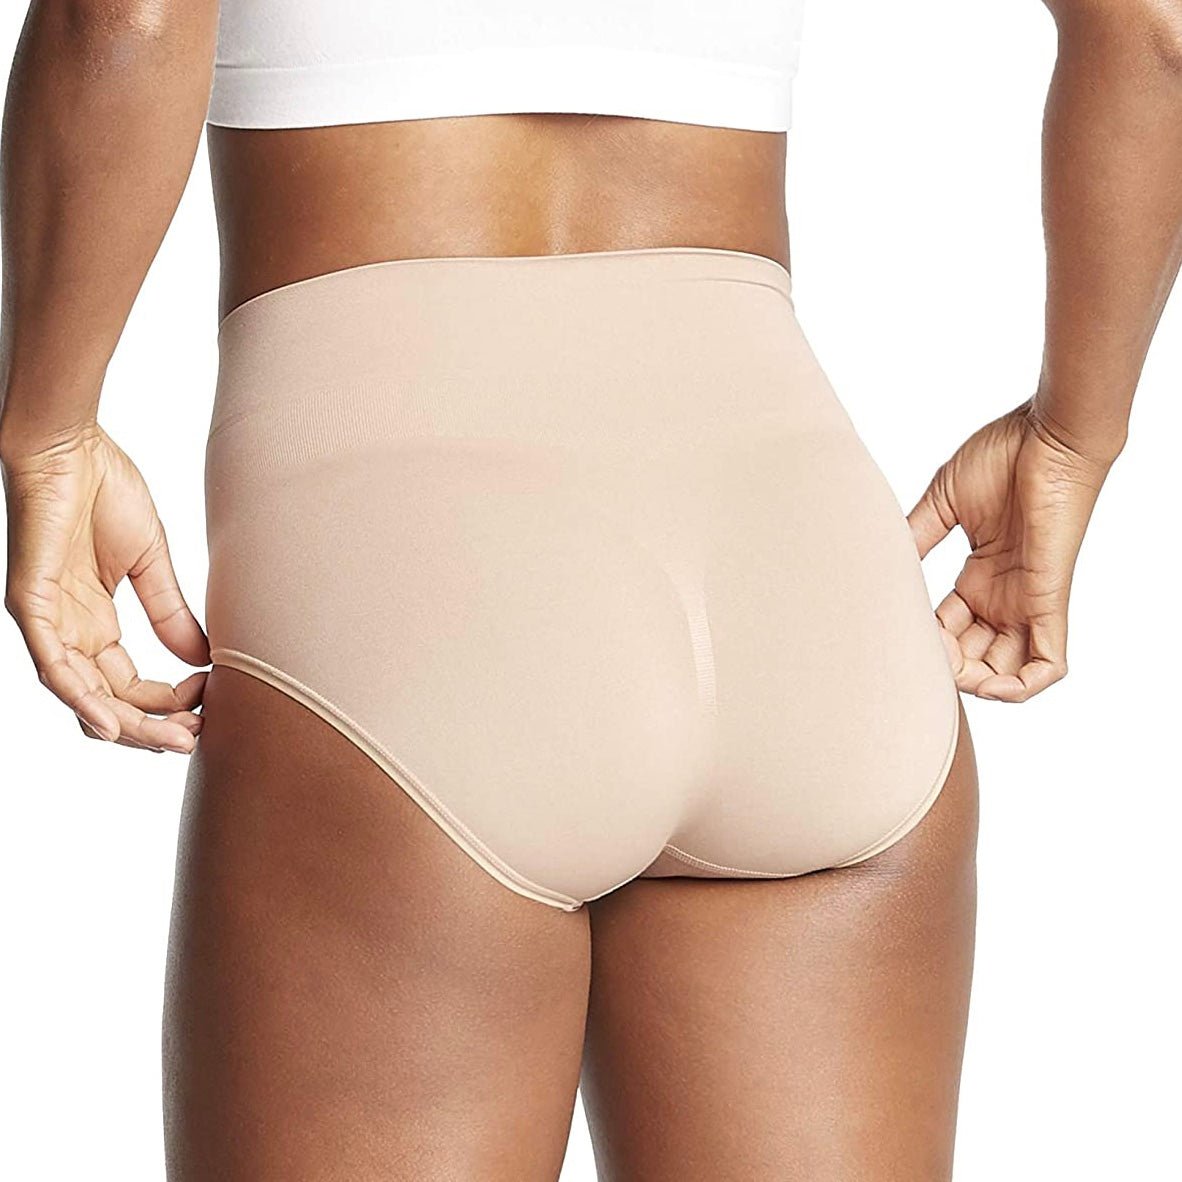 Yummie - Livi High Waist Shaping Brief - More Colors - About the Bra